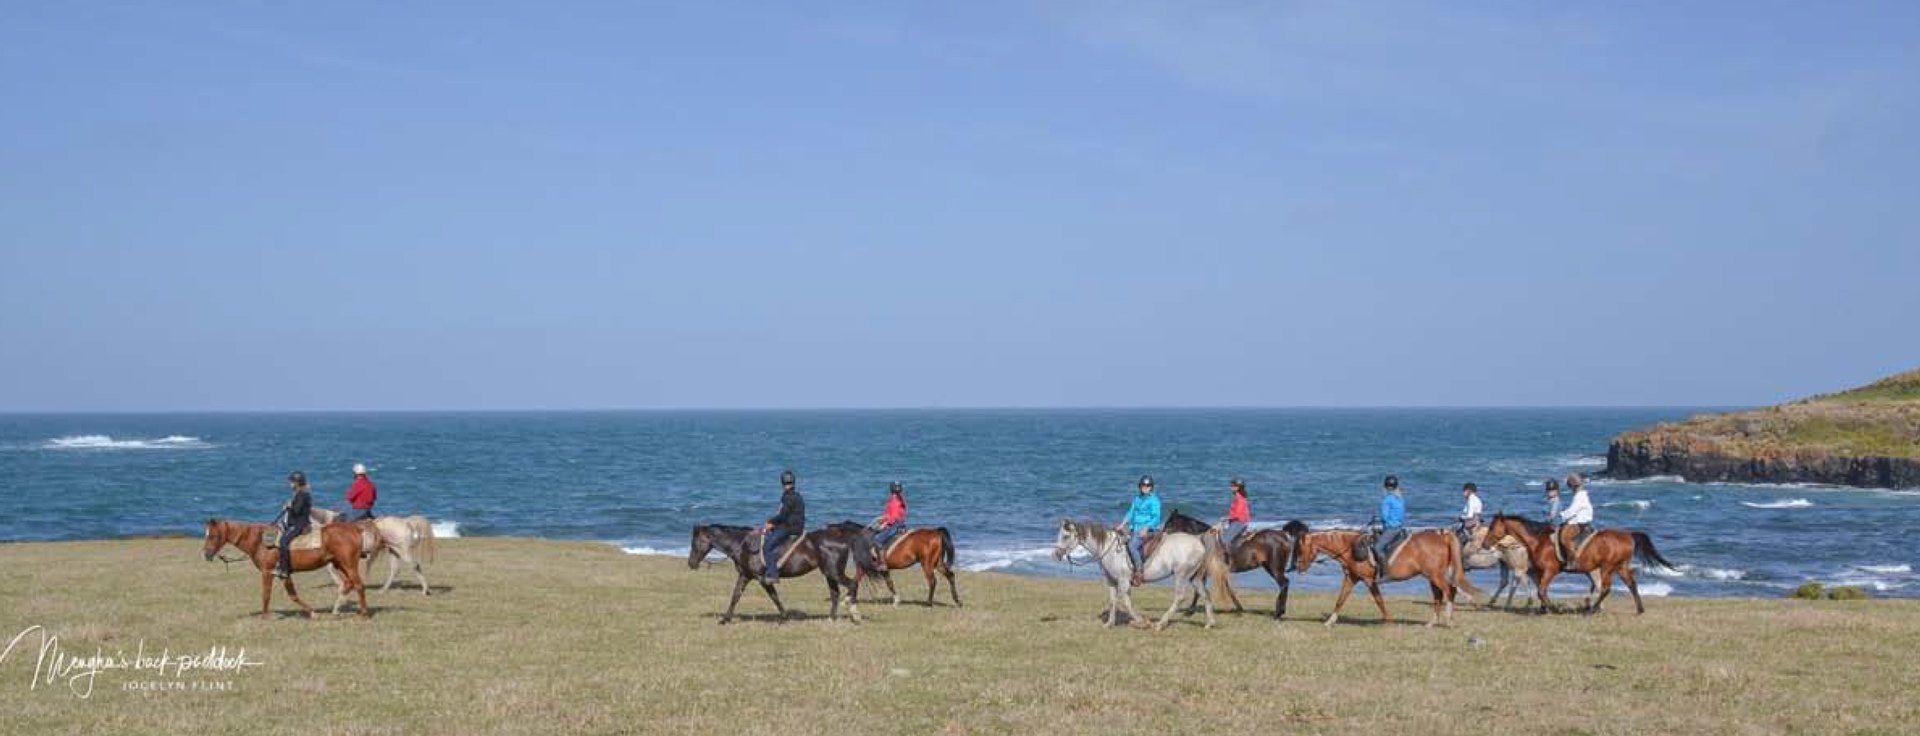 great view with horses